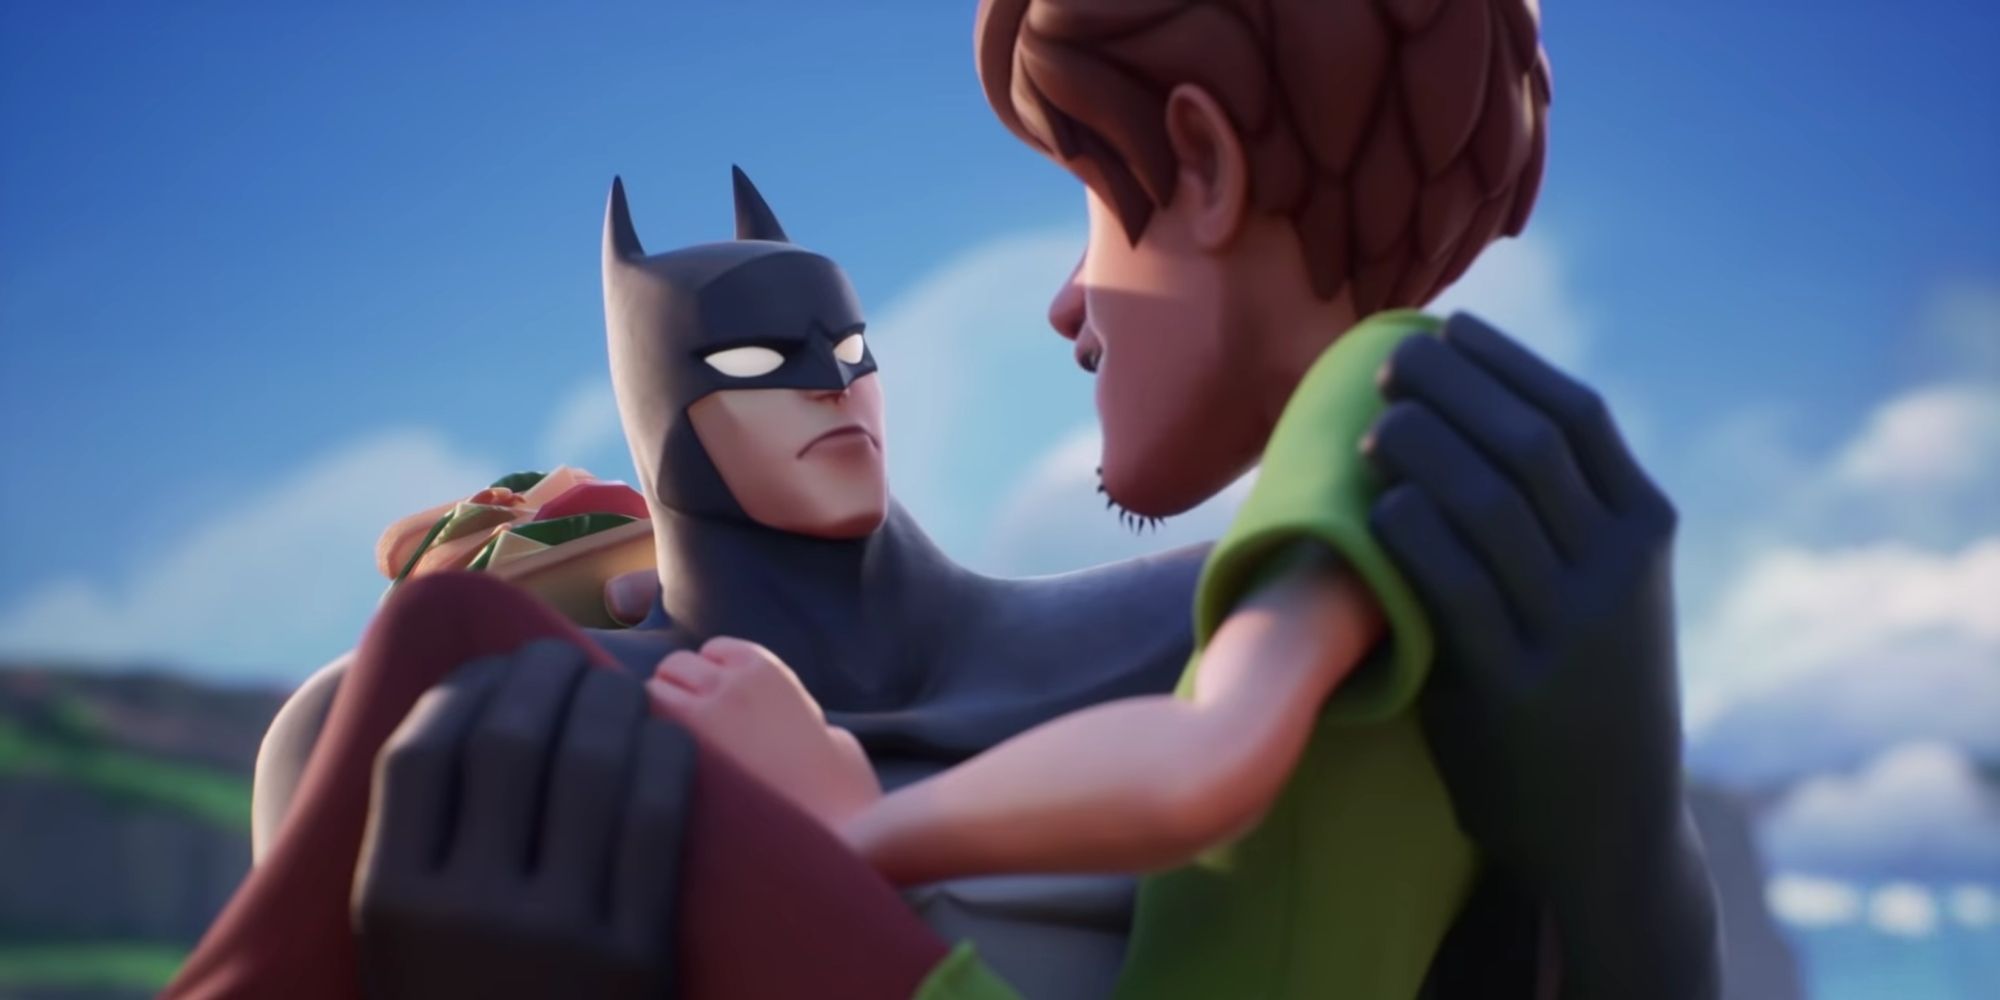 Batman holding Shaggy in the MultiVersus cinematic trailer.